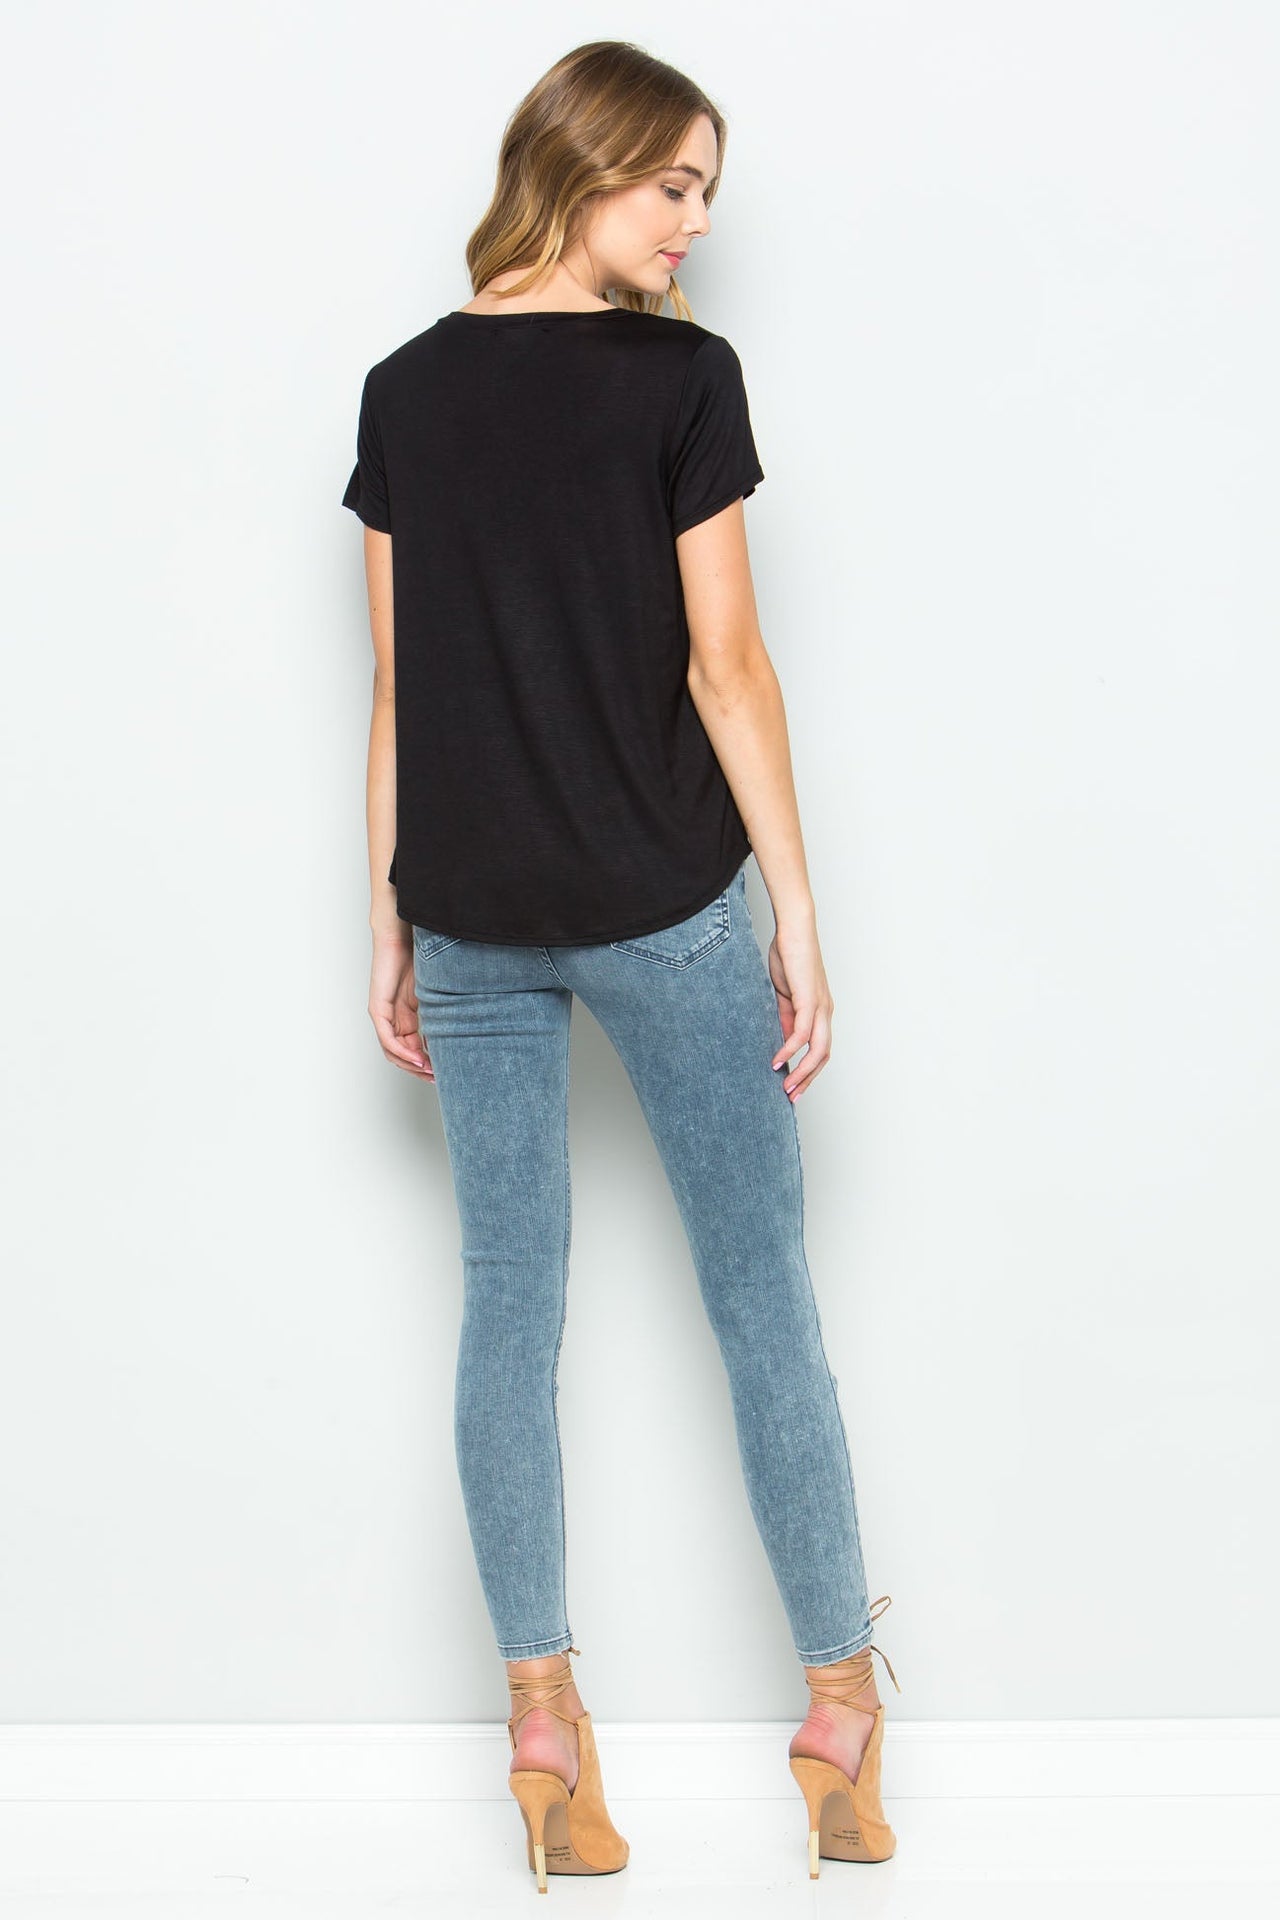 Black V Neck Pocket Tee, Tops by Wasabi and Mint | LIT Boutique